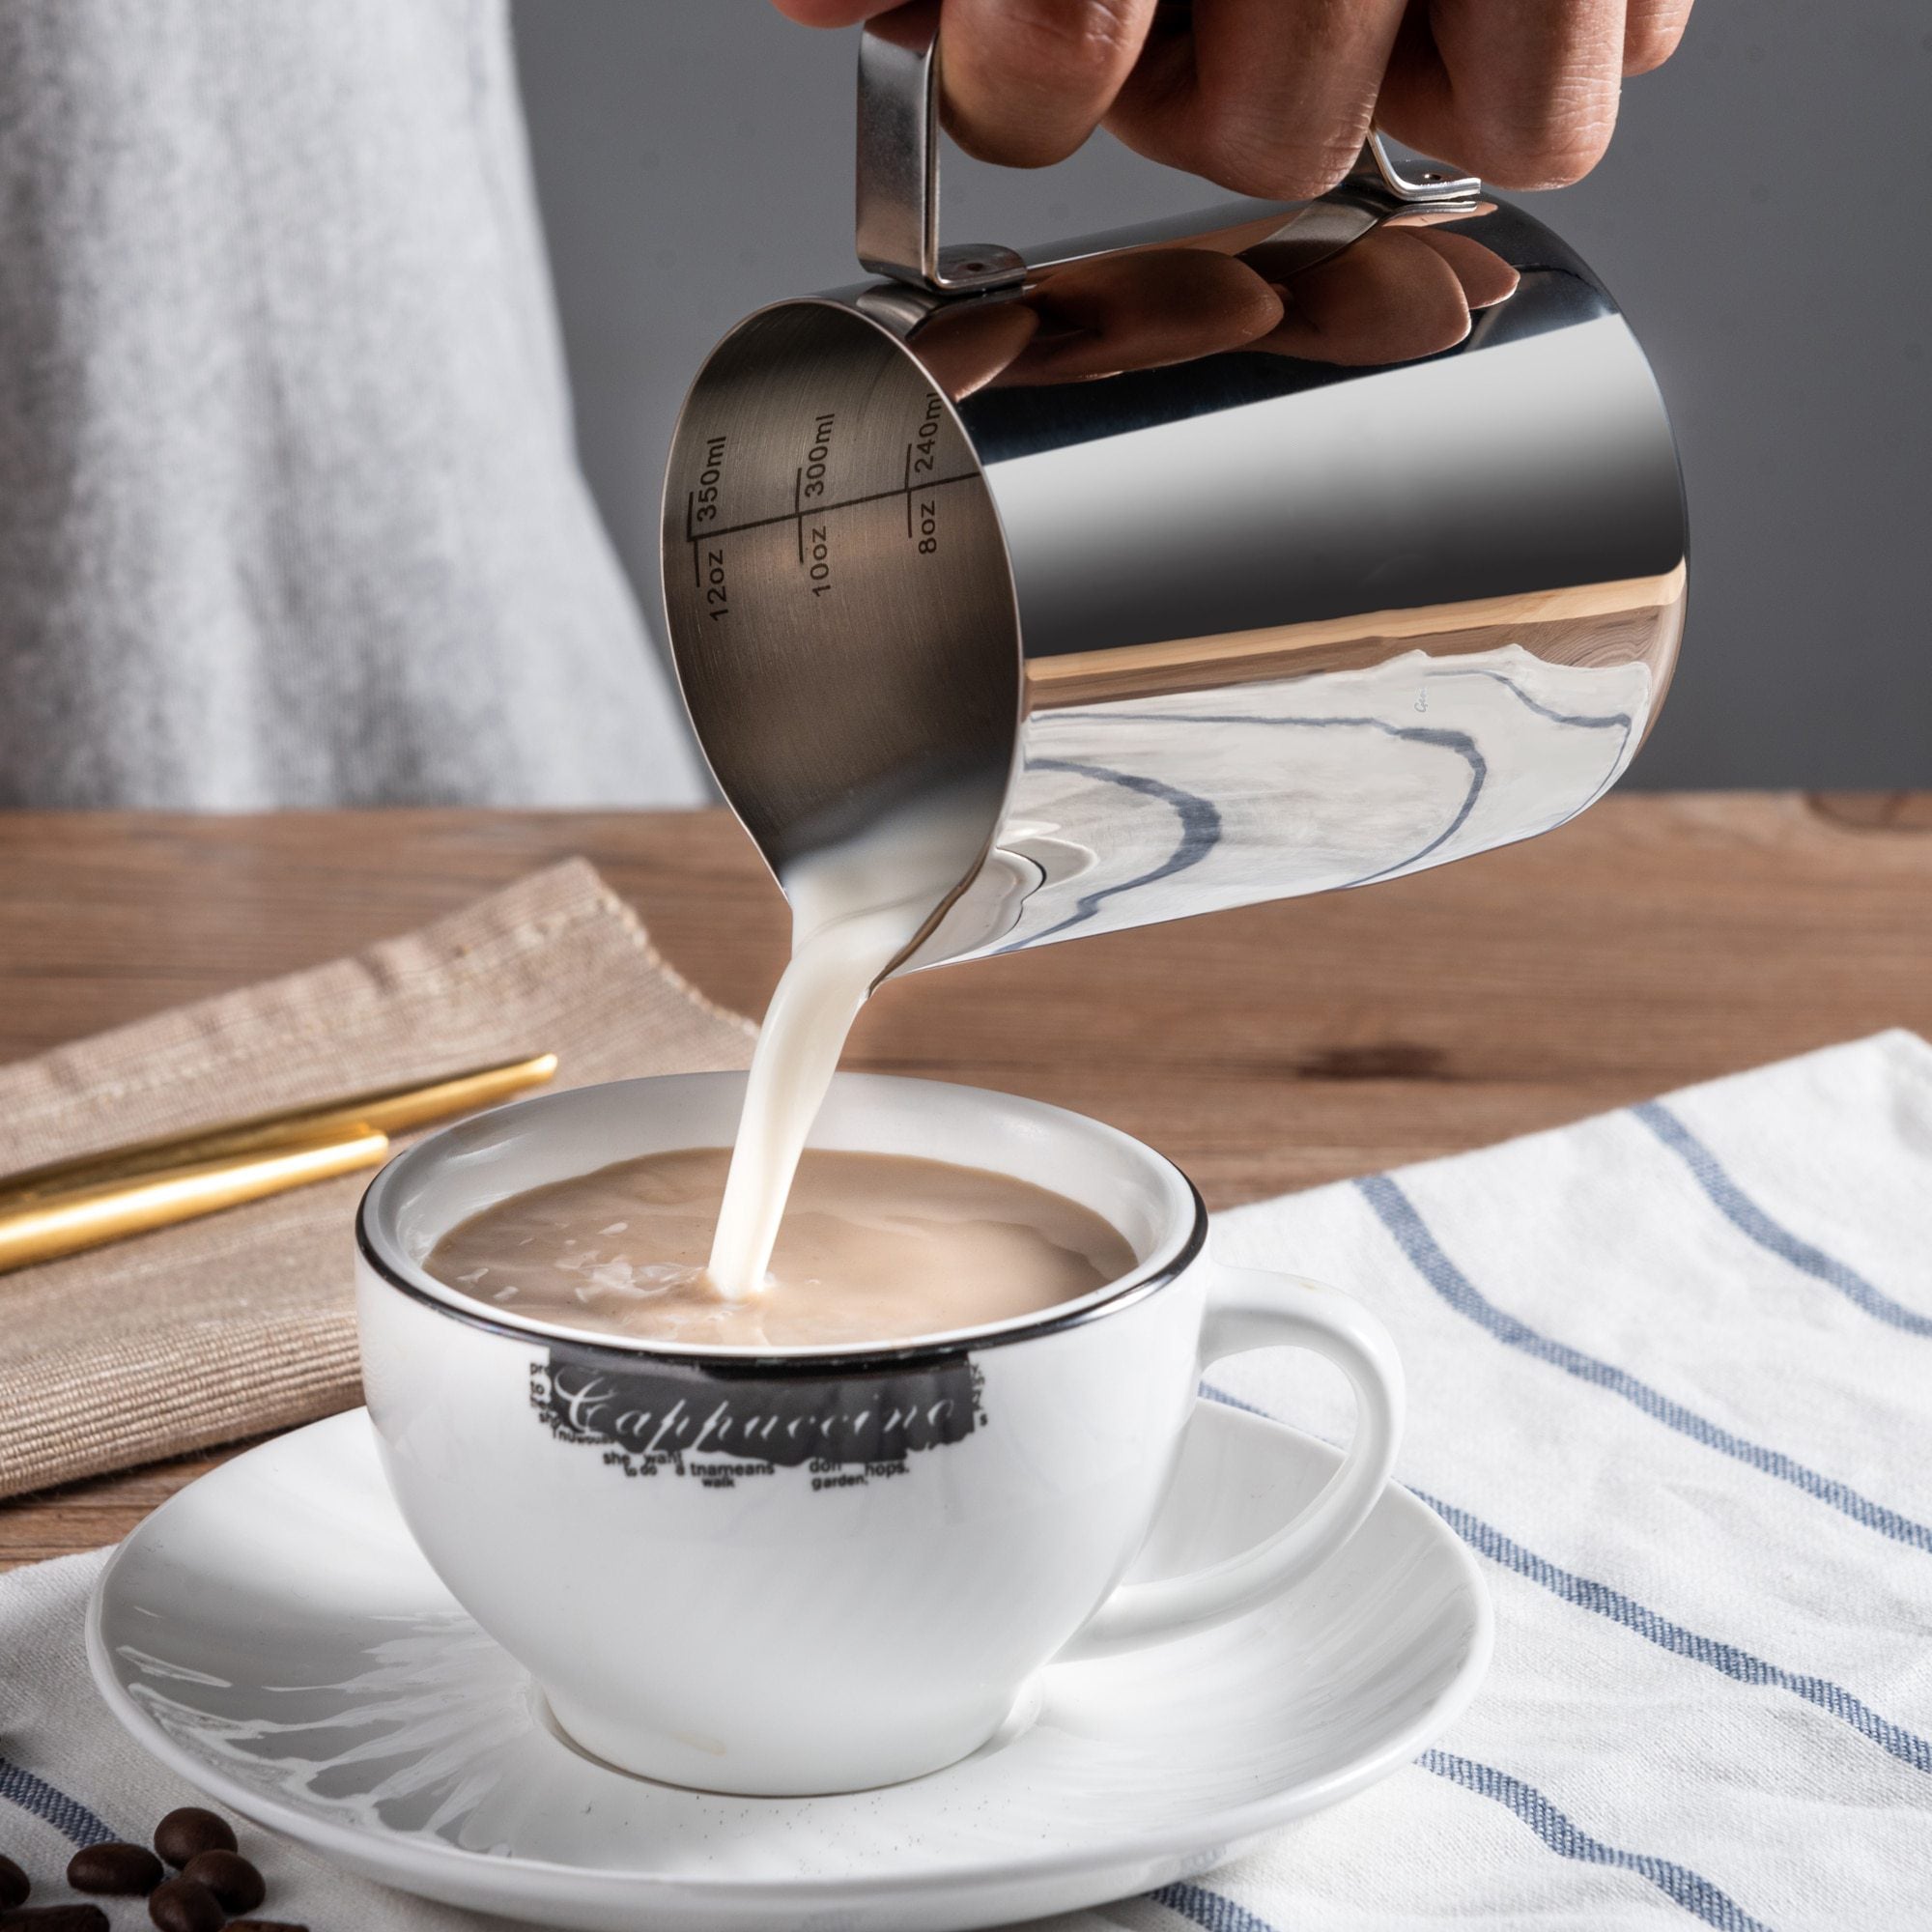 Stainless Steel Milk Frothing Pitcher Espresso Coffee Barista Craft Latte Cappuccino Milk Cream Frother Cup Pitcher Jug Maker